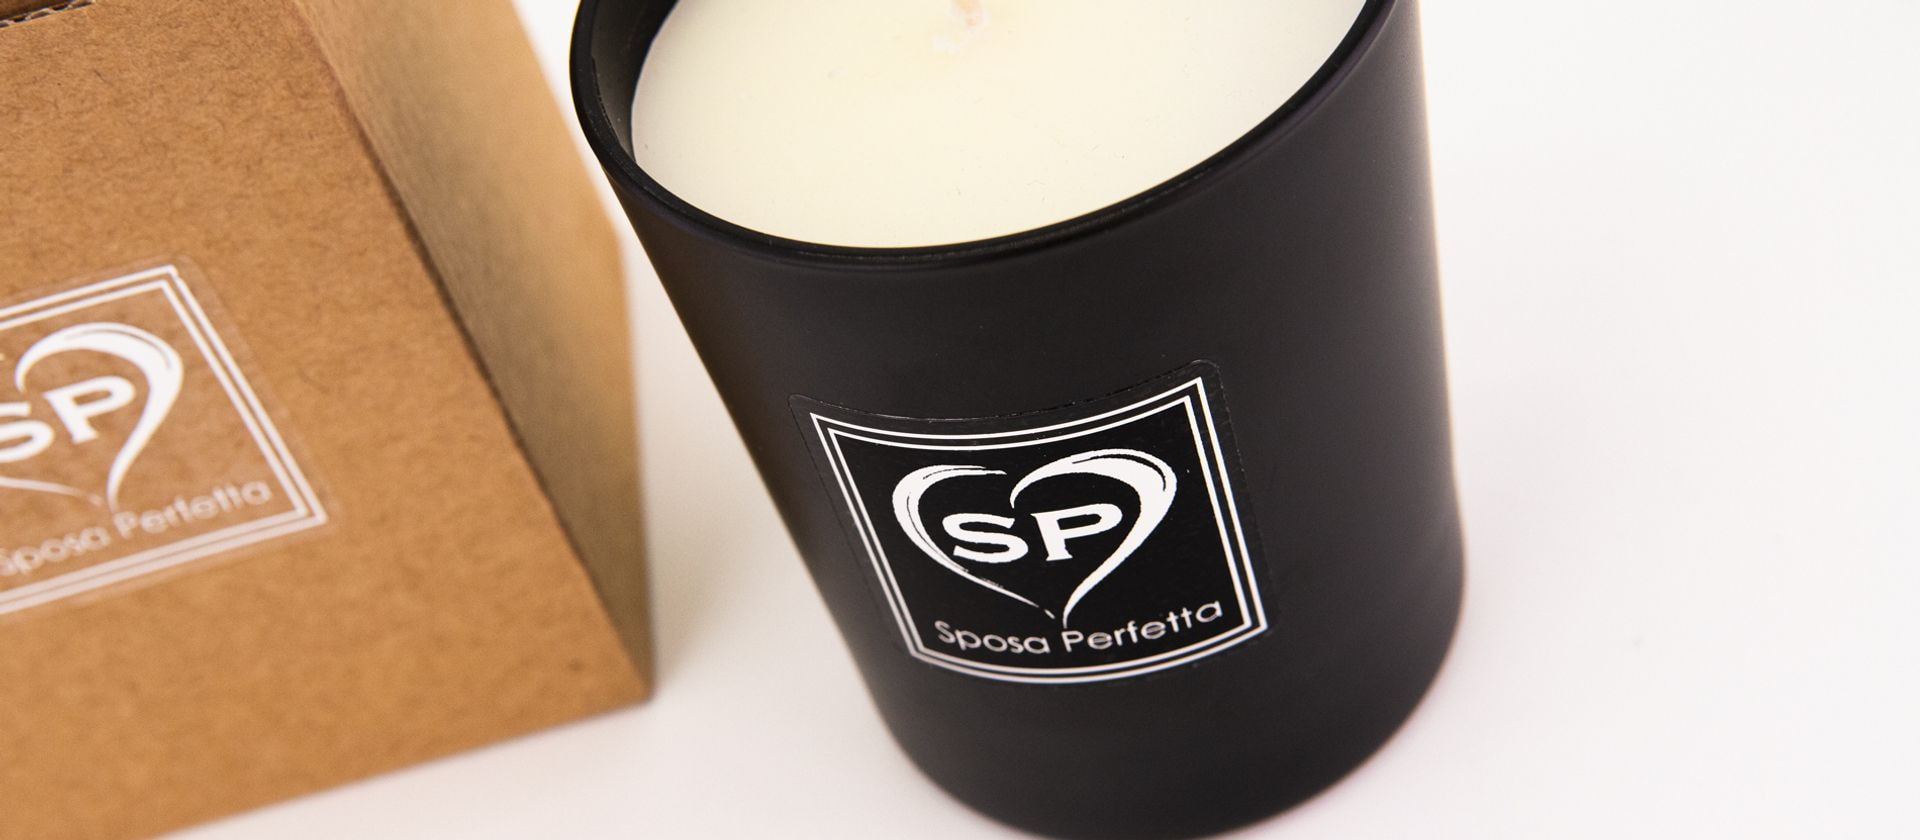 Black satin scented candle